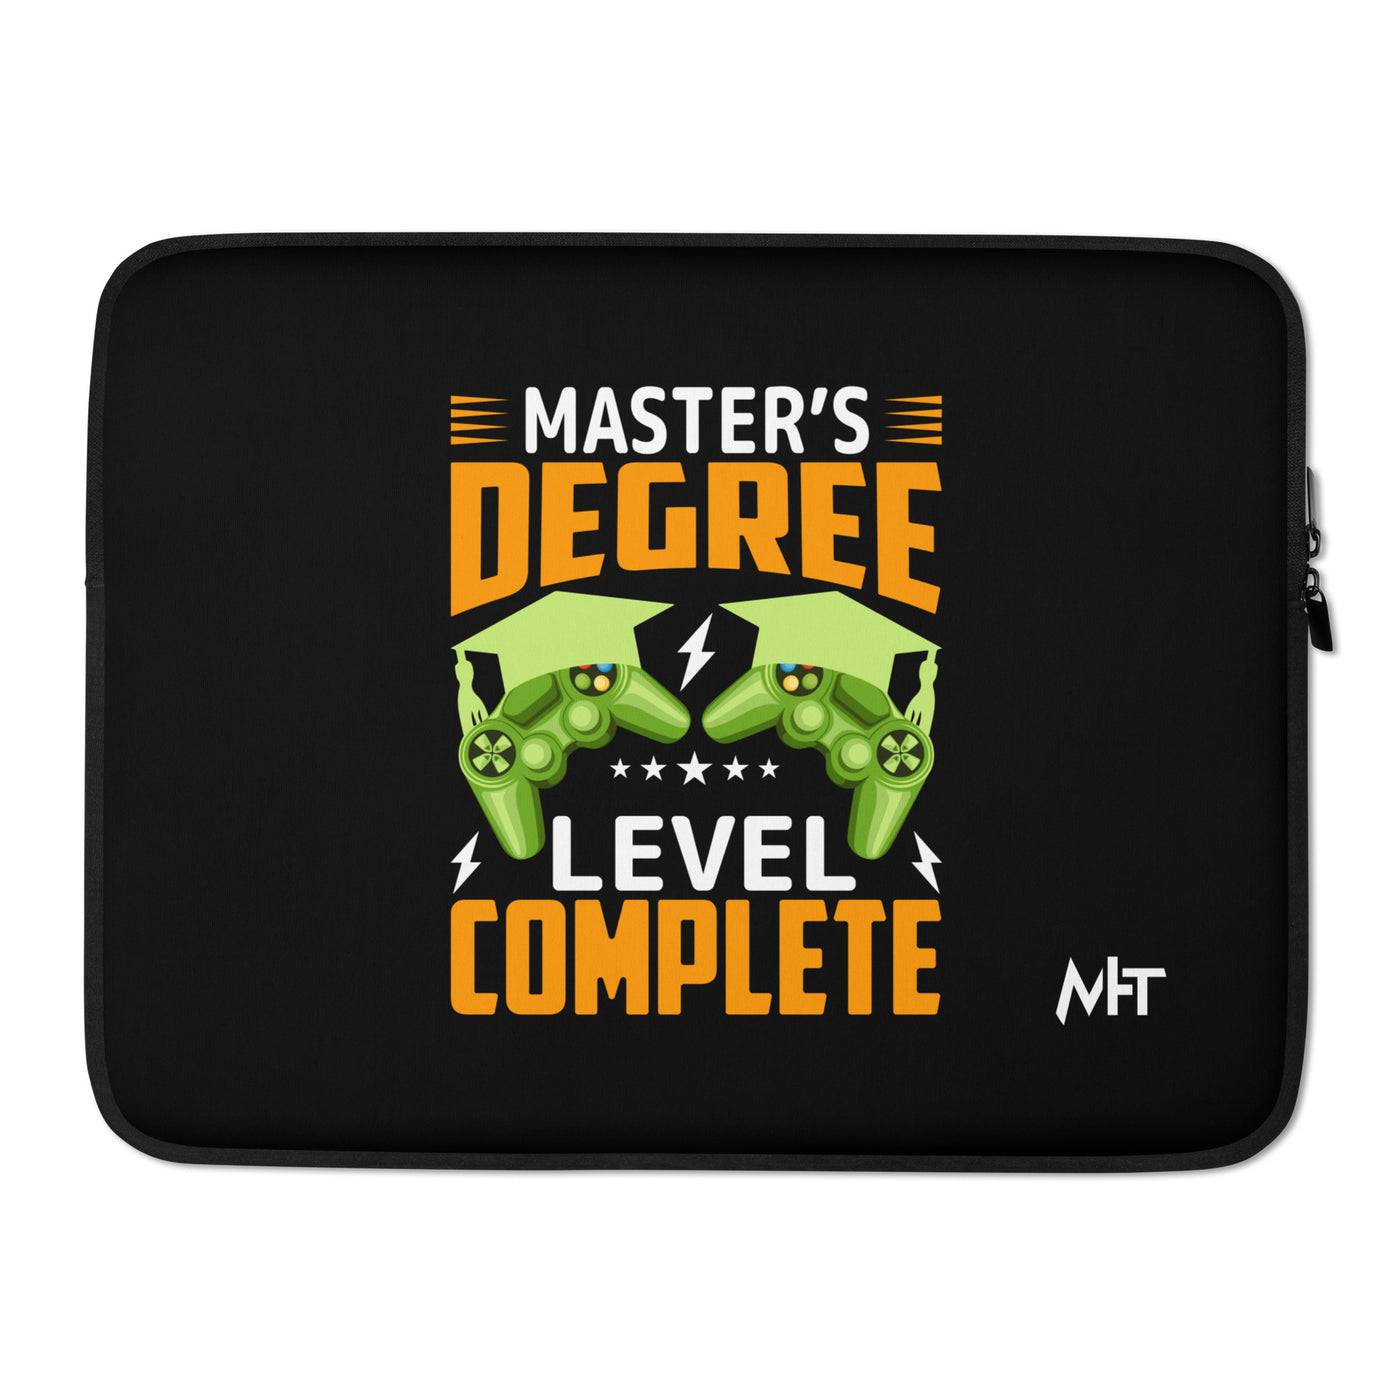 Master's Degree Level Complete - Laptop Sleeve